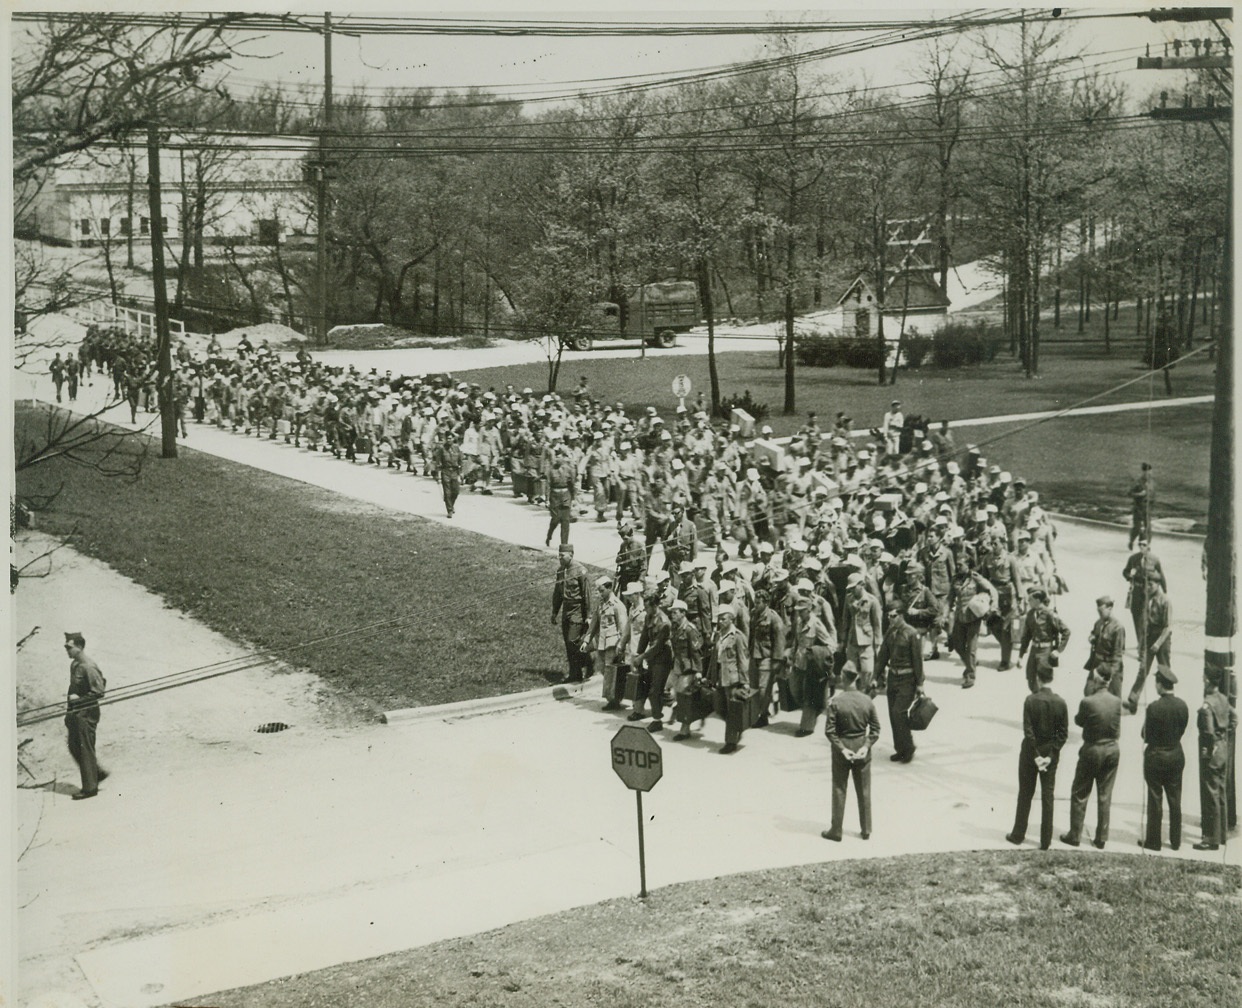 FORT SEES FIRST PRISONERS SINCE INDIANS, 5/20/1944. FORT SHERIDAN, ILL. – A new chapter in the history of Fort Sheridan, Ill., was written when German prisoners, many of them wearing uniforms in which they were captured, marched down the street on their way to the stockade where they will be confined. The Nazi ex-soldiers transferred from Camp Leonard Wood, Mo., are the first prisoners of war to arrive at Fort Sheridan since the internment of the last of the warring Indians. Credit: OWI Radiophoto from ACME;